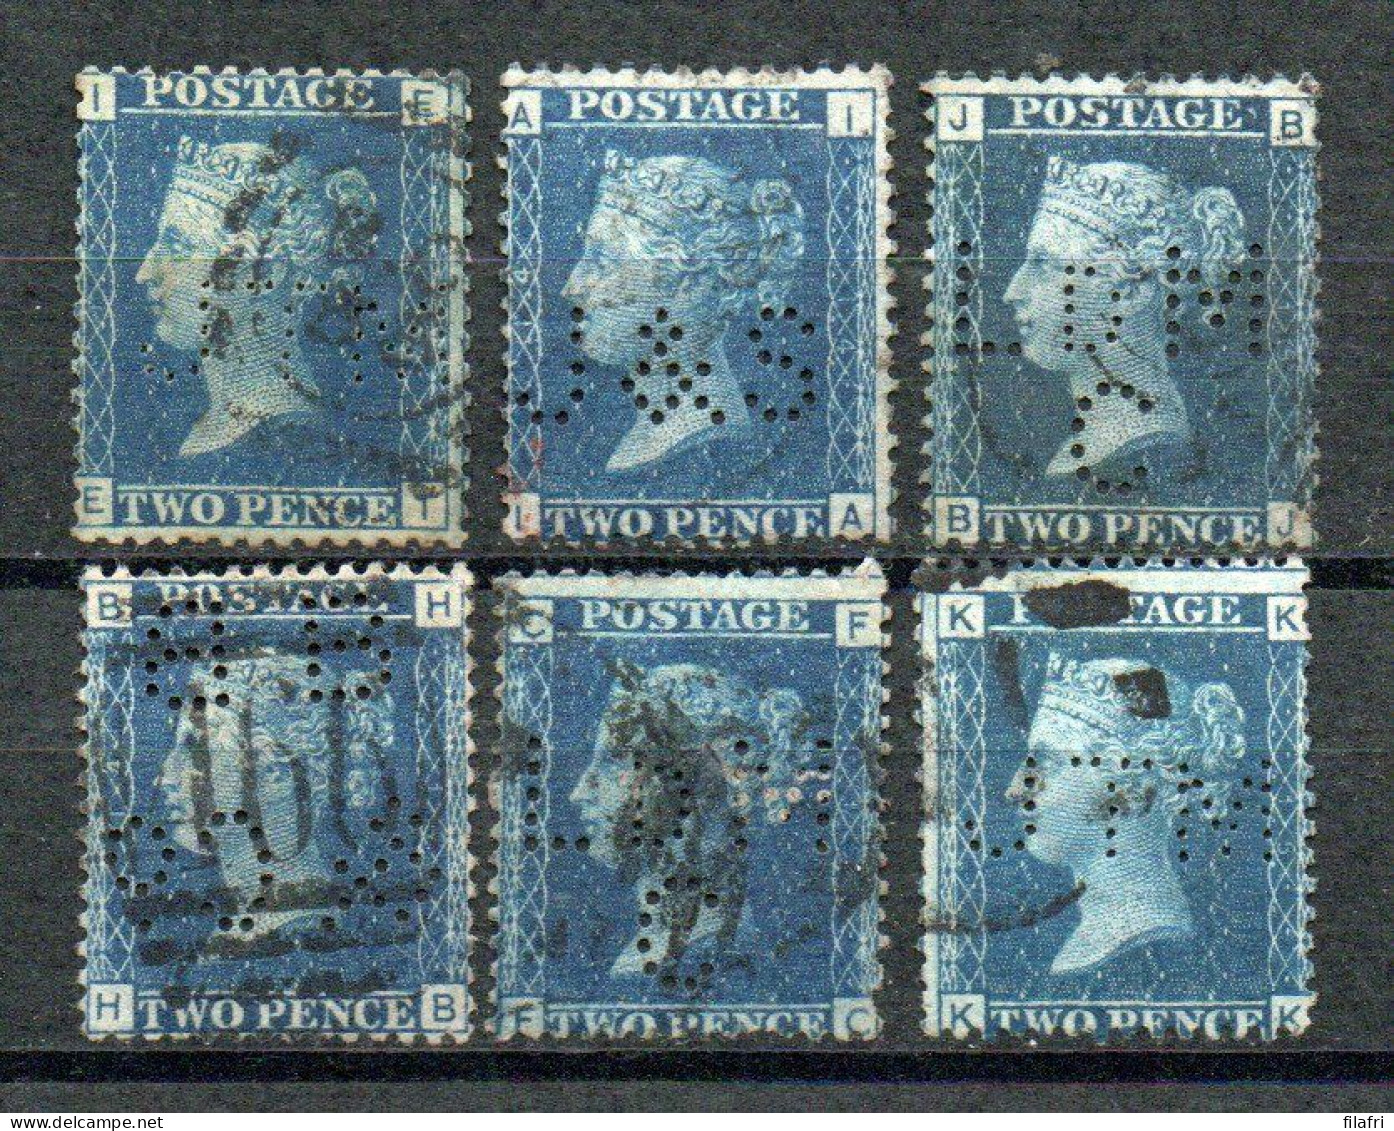 Yv 27 - 6 Perfins - Period 1840 - 1901 "Queen Victoria" : Quality Stamps (2 Scans) - Perfin